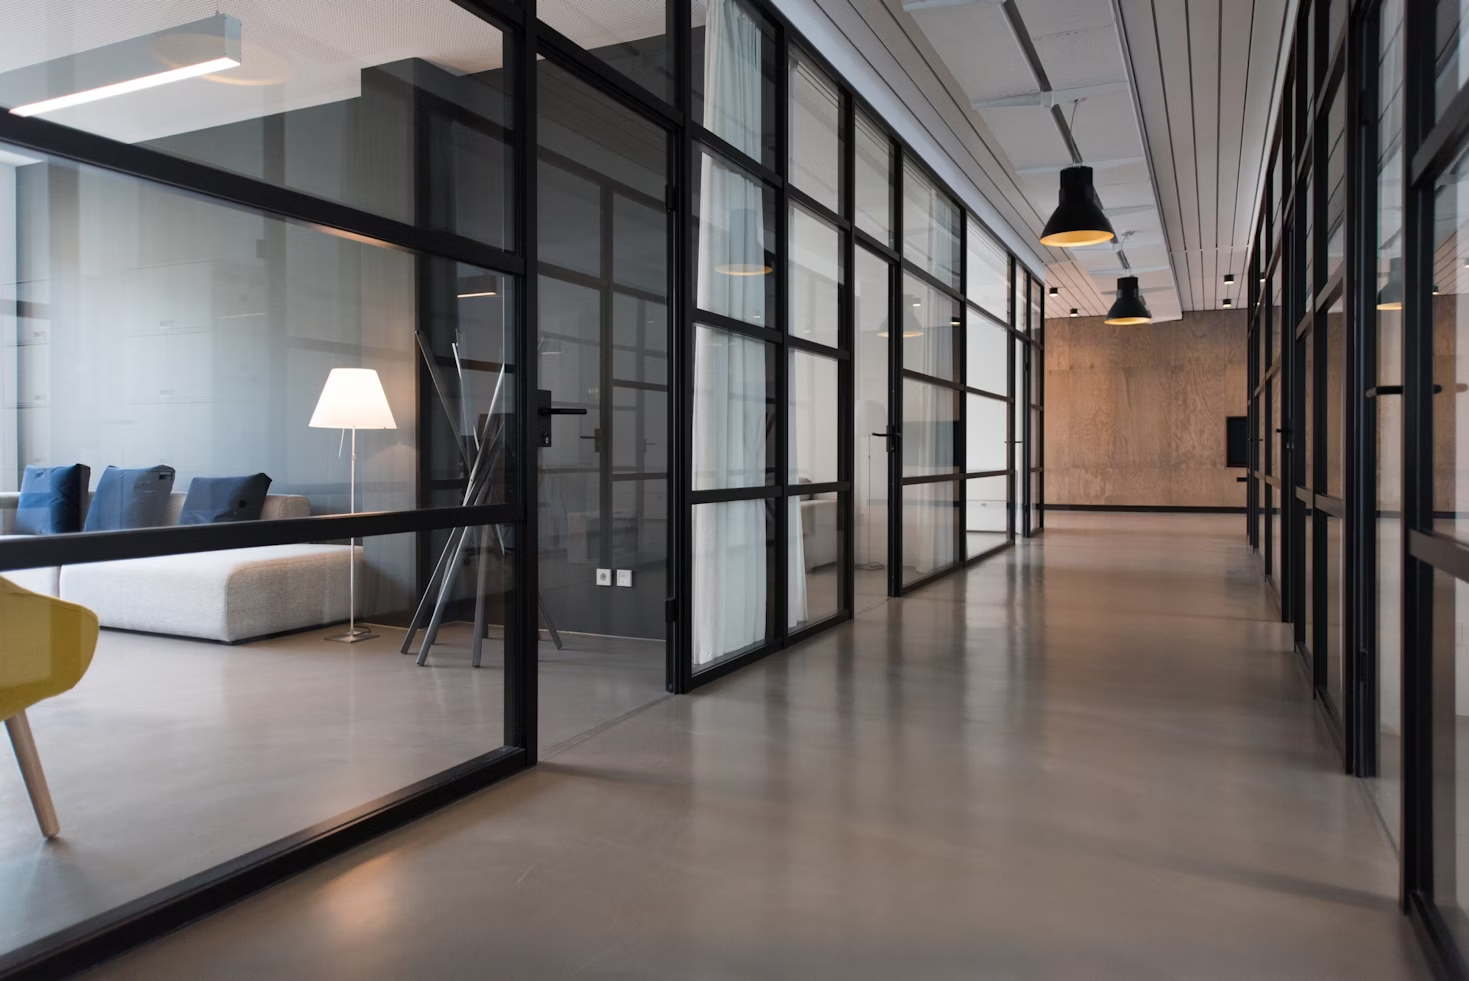 Glass doors installed in an office